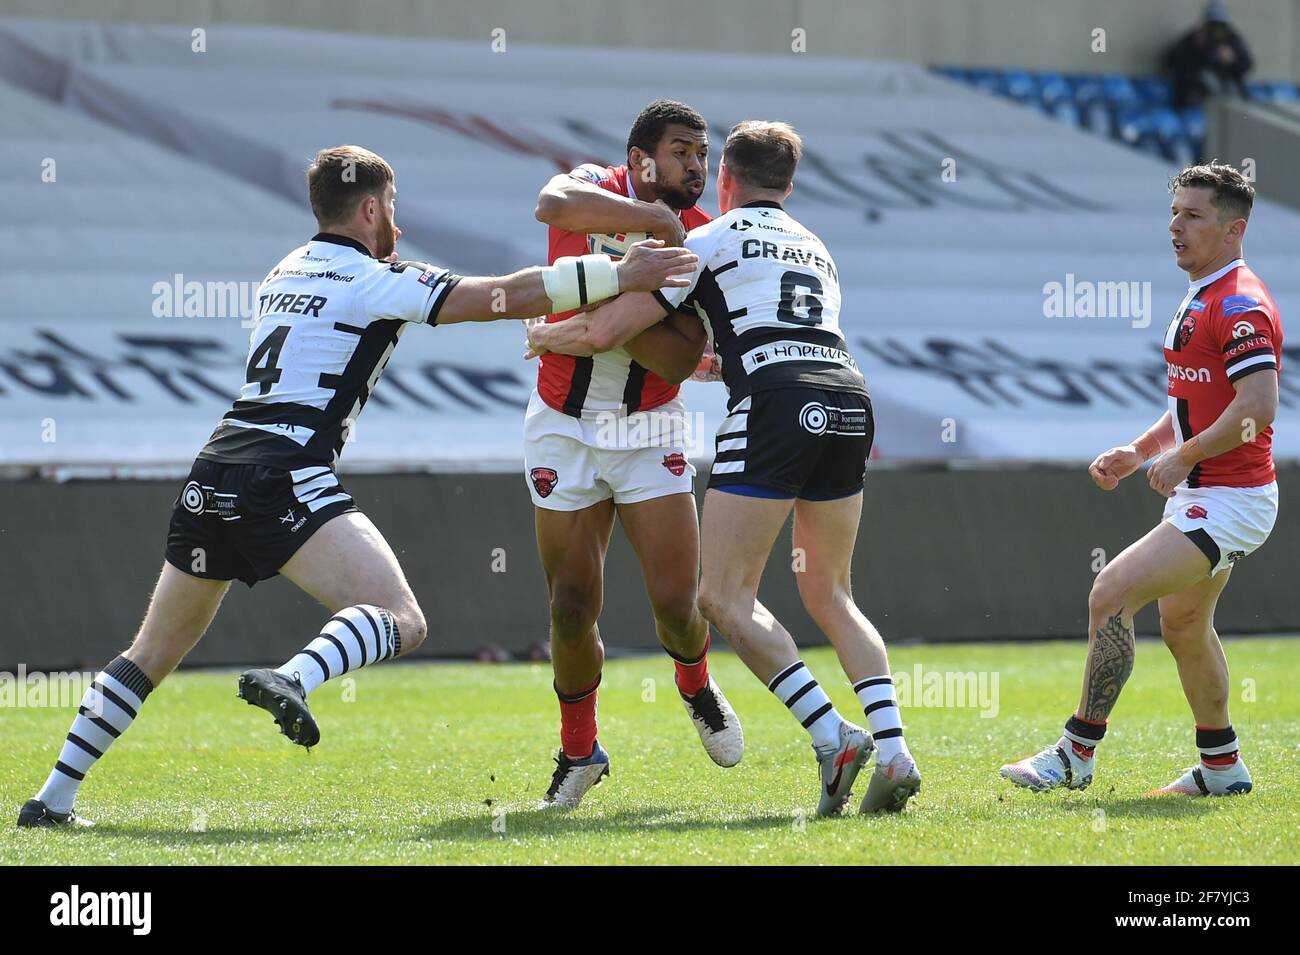 Eccles, UK. 10th Apr, 2021. Kallum Watkins (3) of Salford Red Devils is tackled by Danny Craven (6) of Widnes Vikings in Eccles, UK on 4/10/2021. (Photo by Richard Long/News Images/Sipa USA) Credit: Sipa USA/Alamy Live News Stock Photo